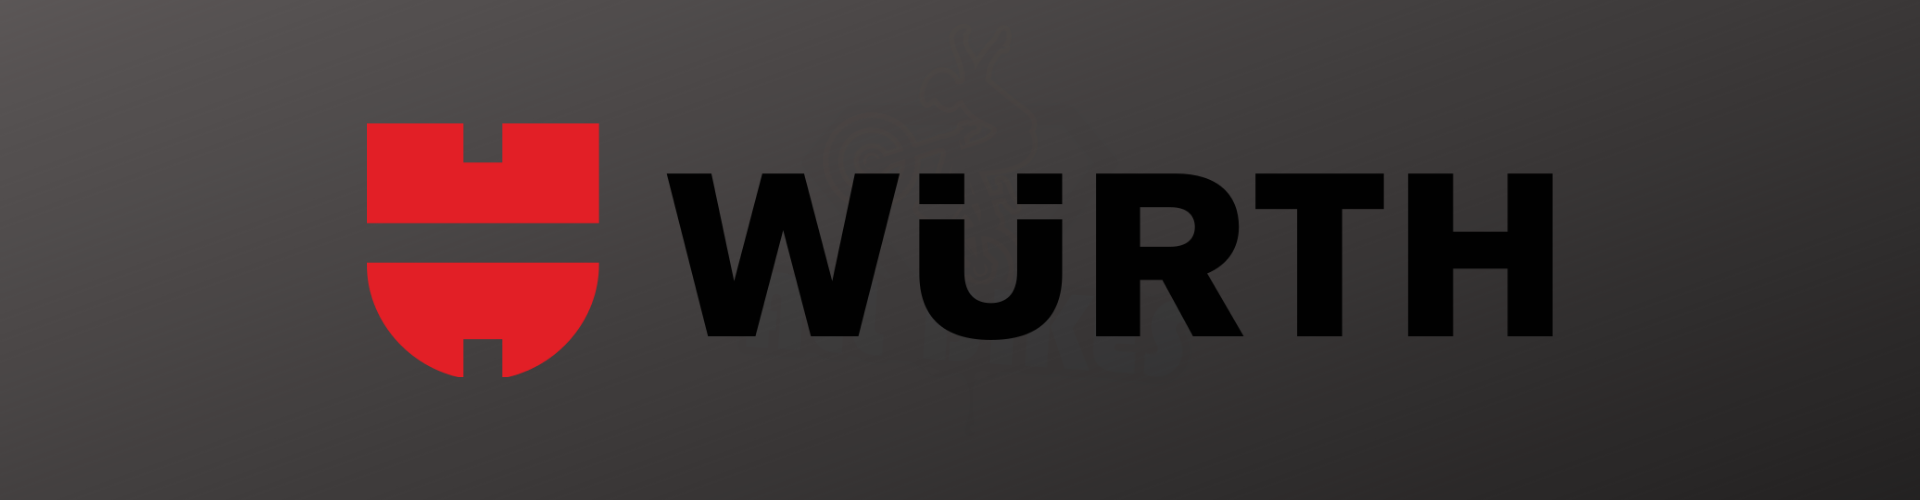 wuerth Brand Category